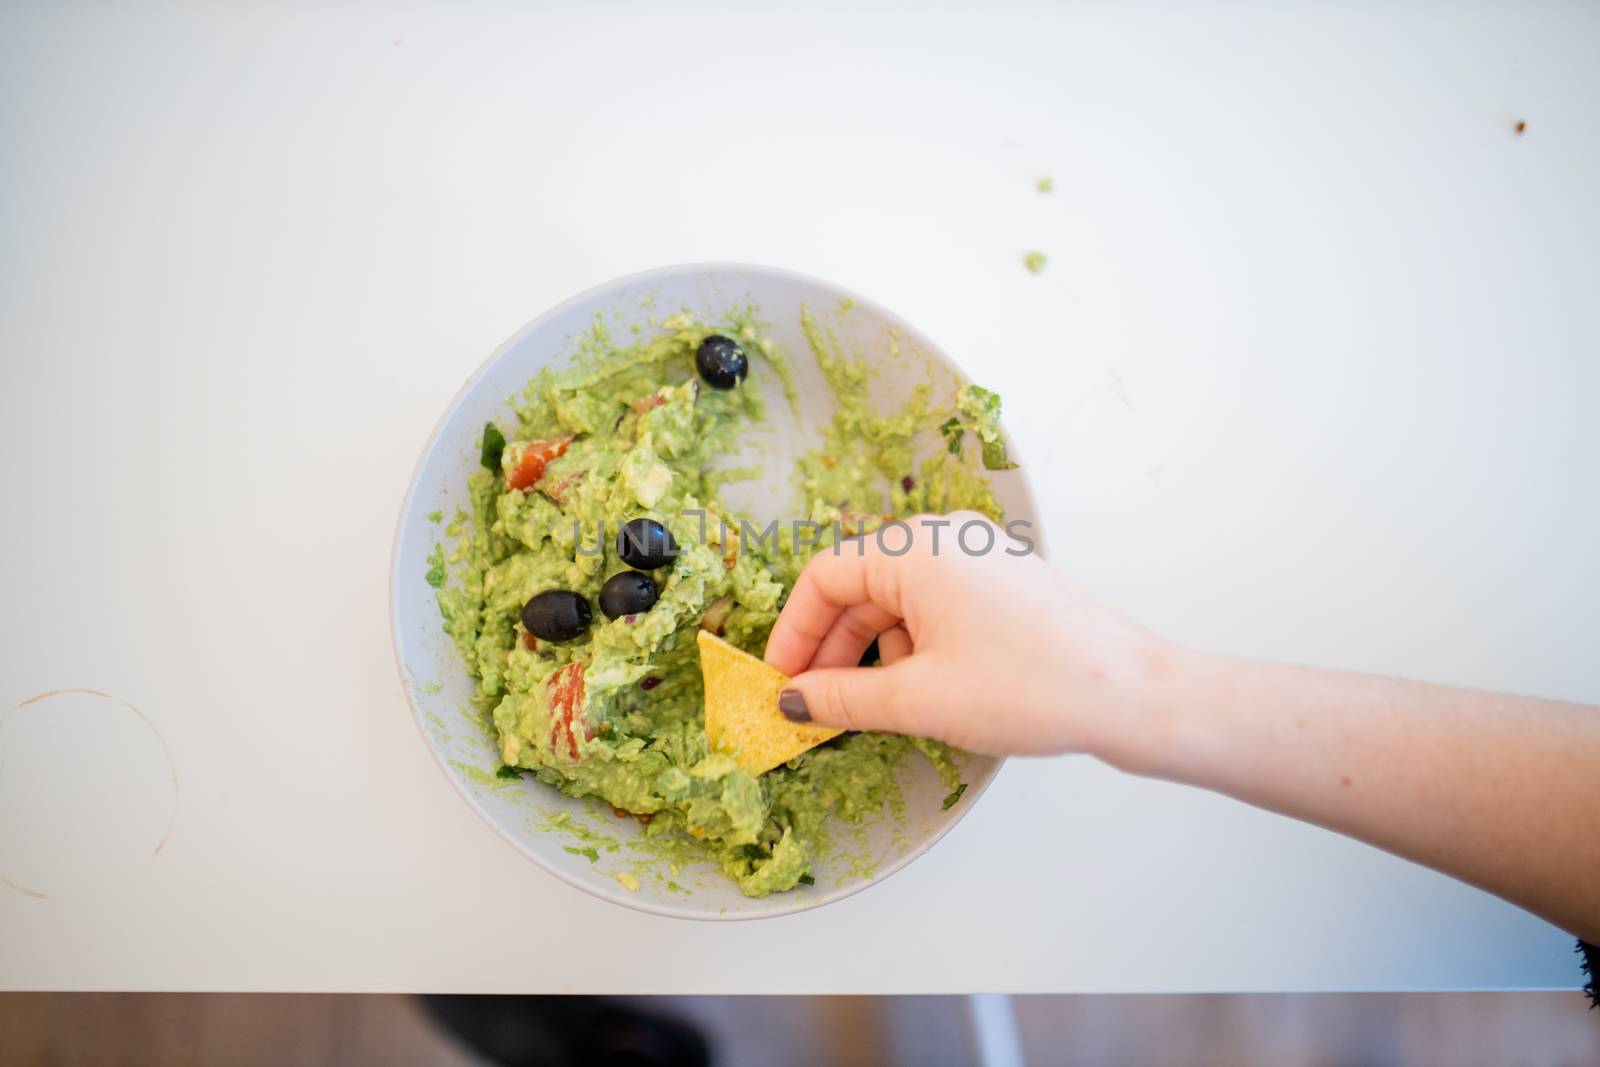 Female hand dipping nachos in guacamole sauce with olives on a white table. Traditional Mexican guacamole on a table from above. Spicy mexican cuisine